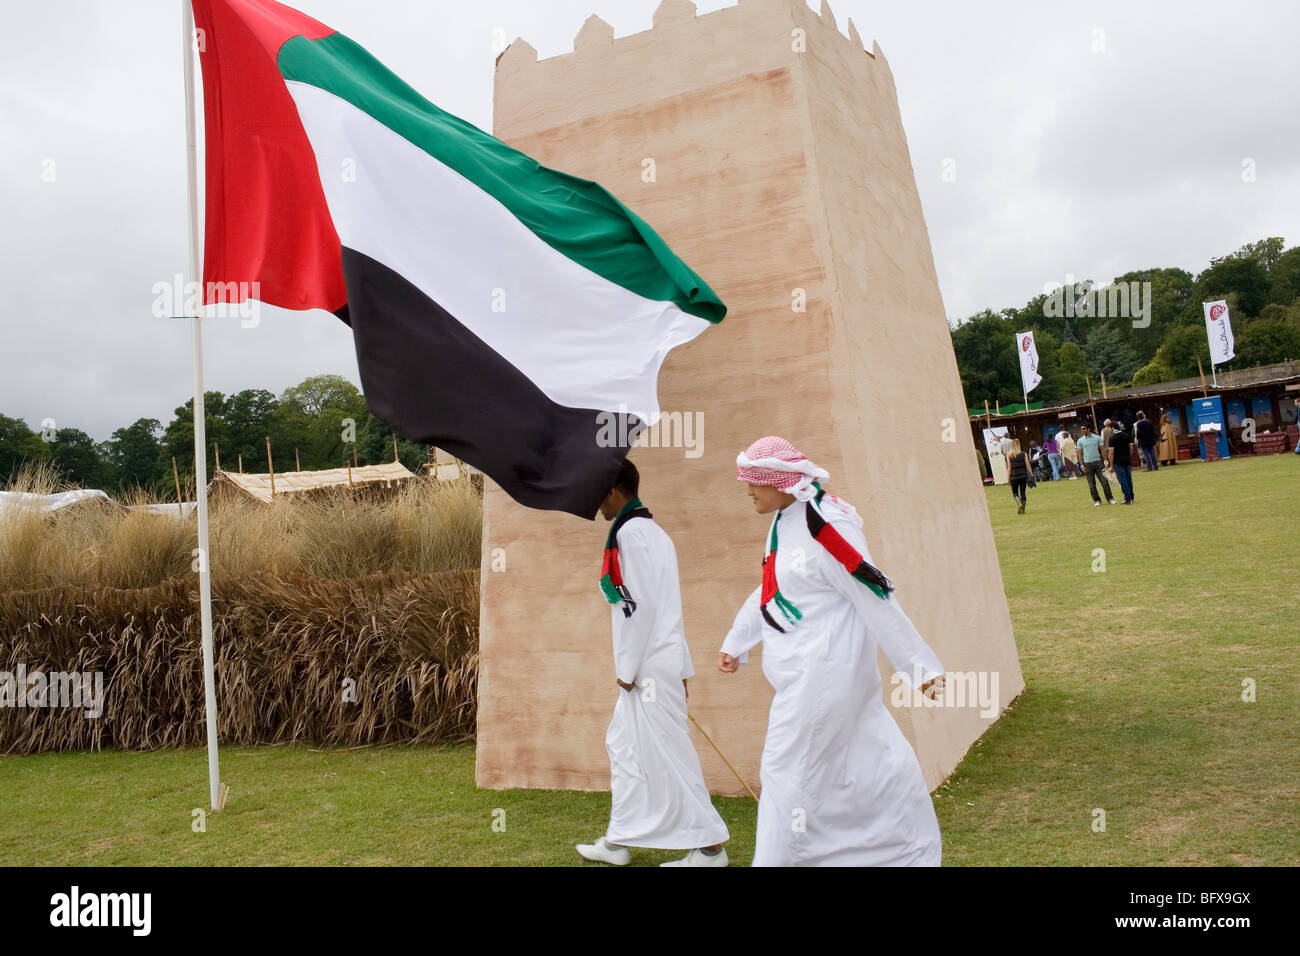 2 emirate men in traditional dress walk past their national flag flying at a falconr festival in the English countryside. Stock Photo